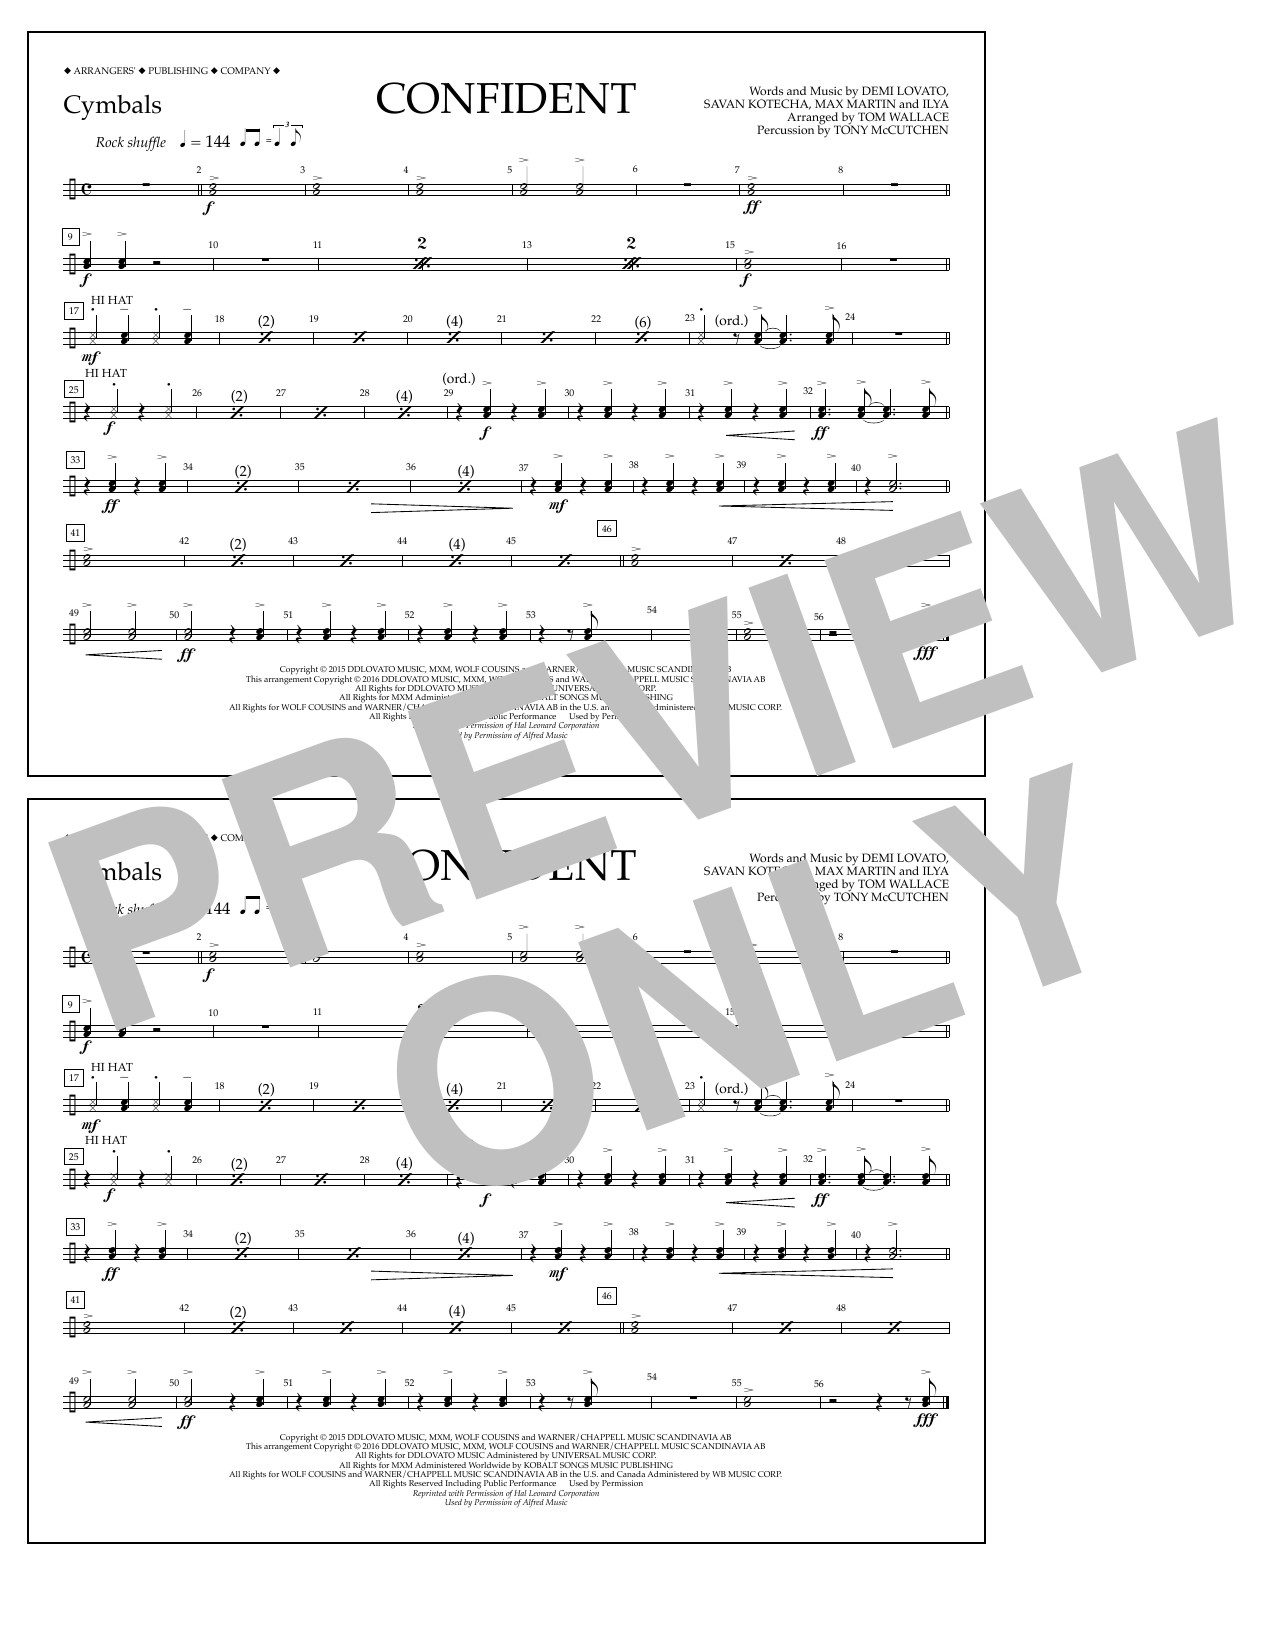 Download Tom Wallace Confident - Cymbals Sheet Music